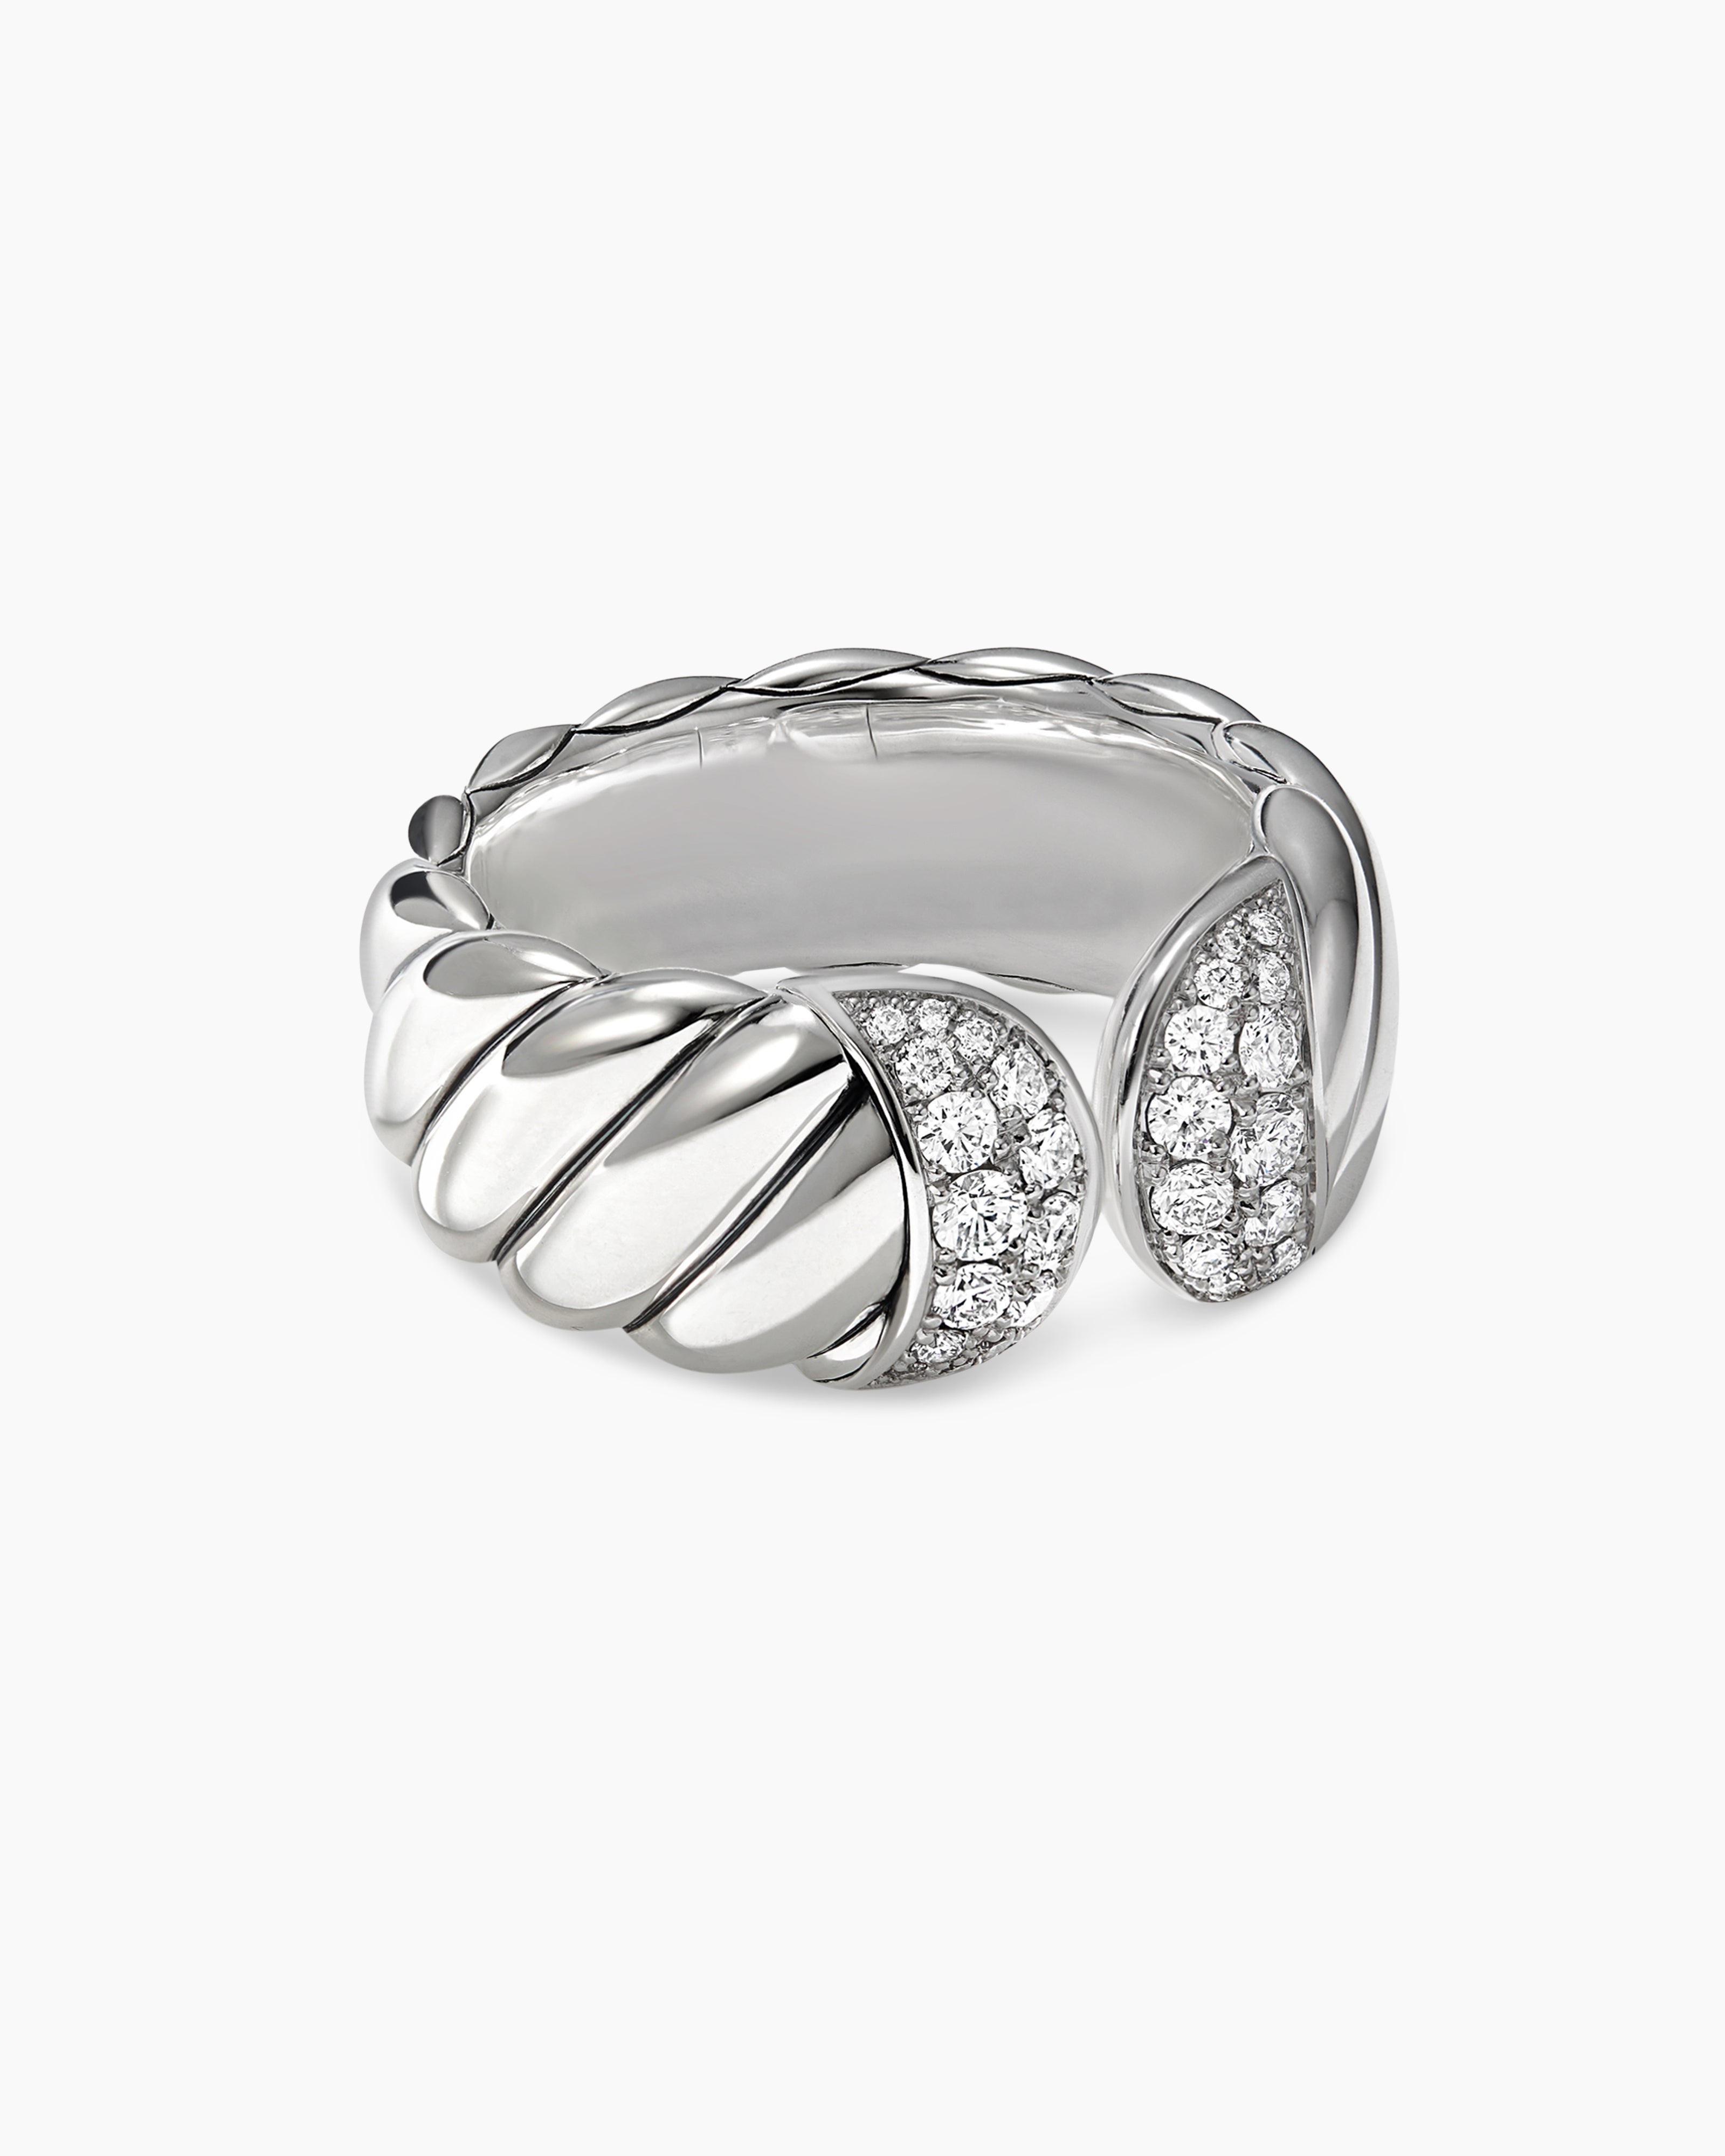 Sculpted Cable Ring in Sterling Silver with Diamonds, 10mm | David